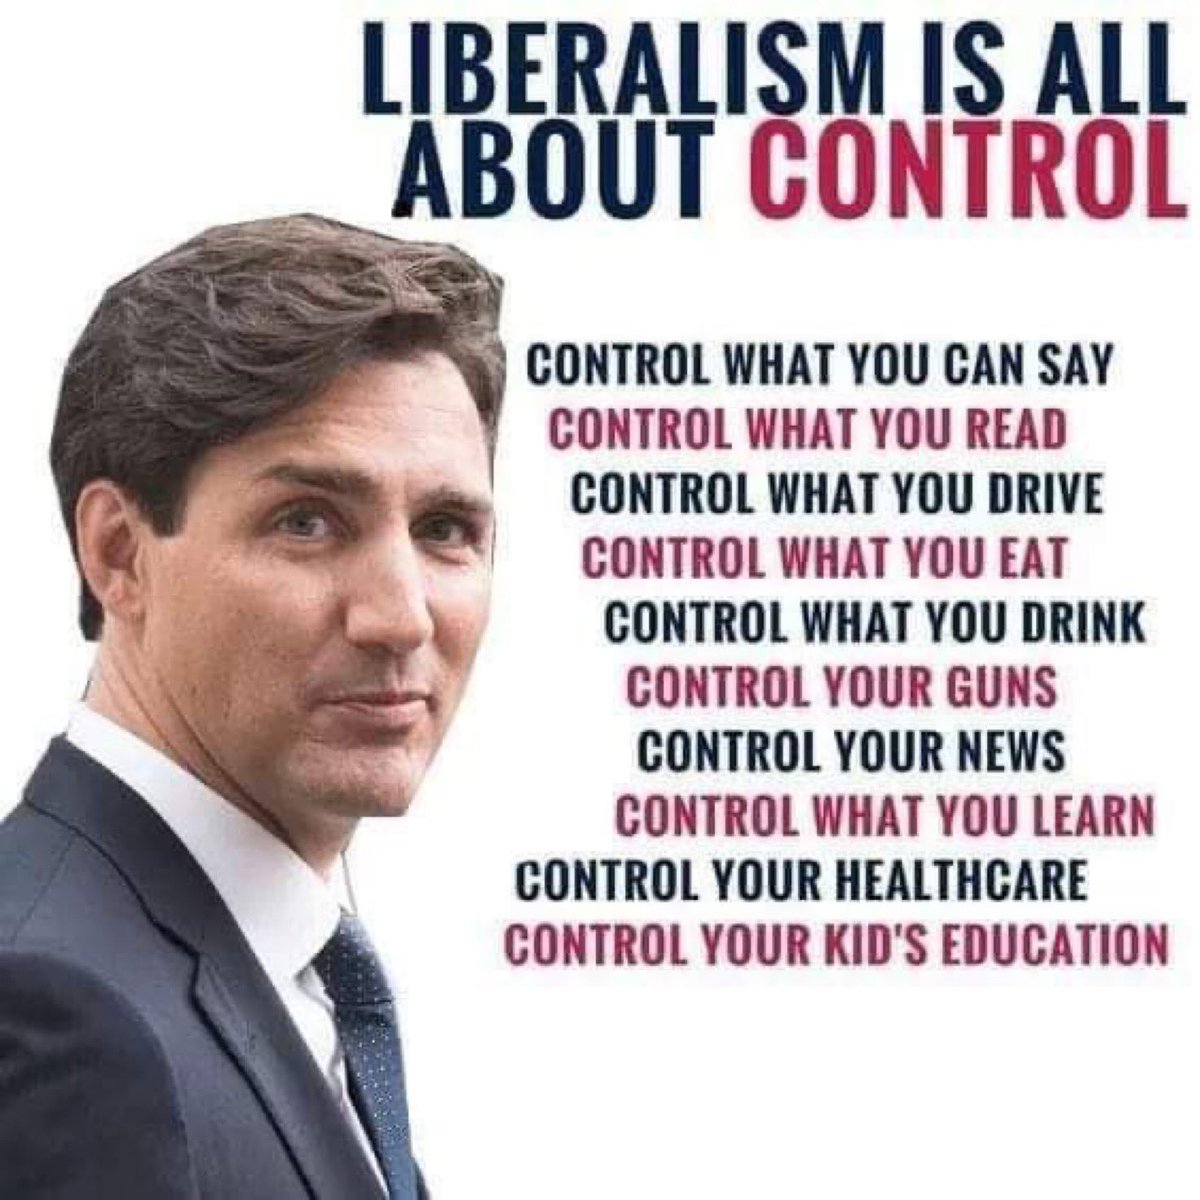 @MichelleLA1981 Satan has countless henchmen and mistresses, among them false prophets and wolves in sheep’s clothing. Trudeau is one of them. #LiberalismIsACult #TrudeauDestroyingCanada #Shameless #Immoral #Corrupt #Evil #Dictatorial #TrudeauDestroyingCanada #LiberalismIsTheRealPandemic